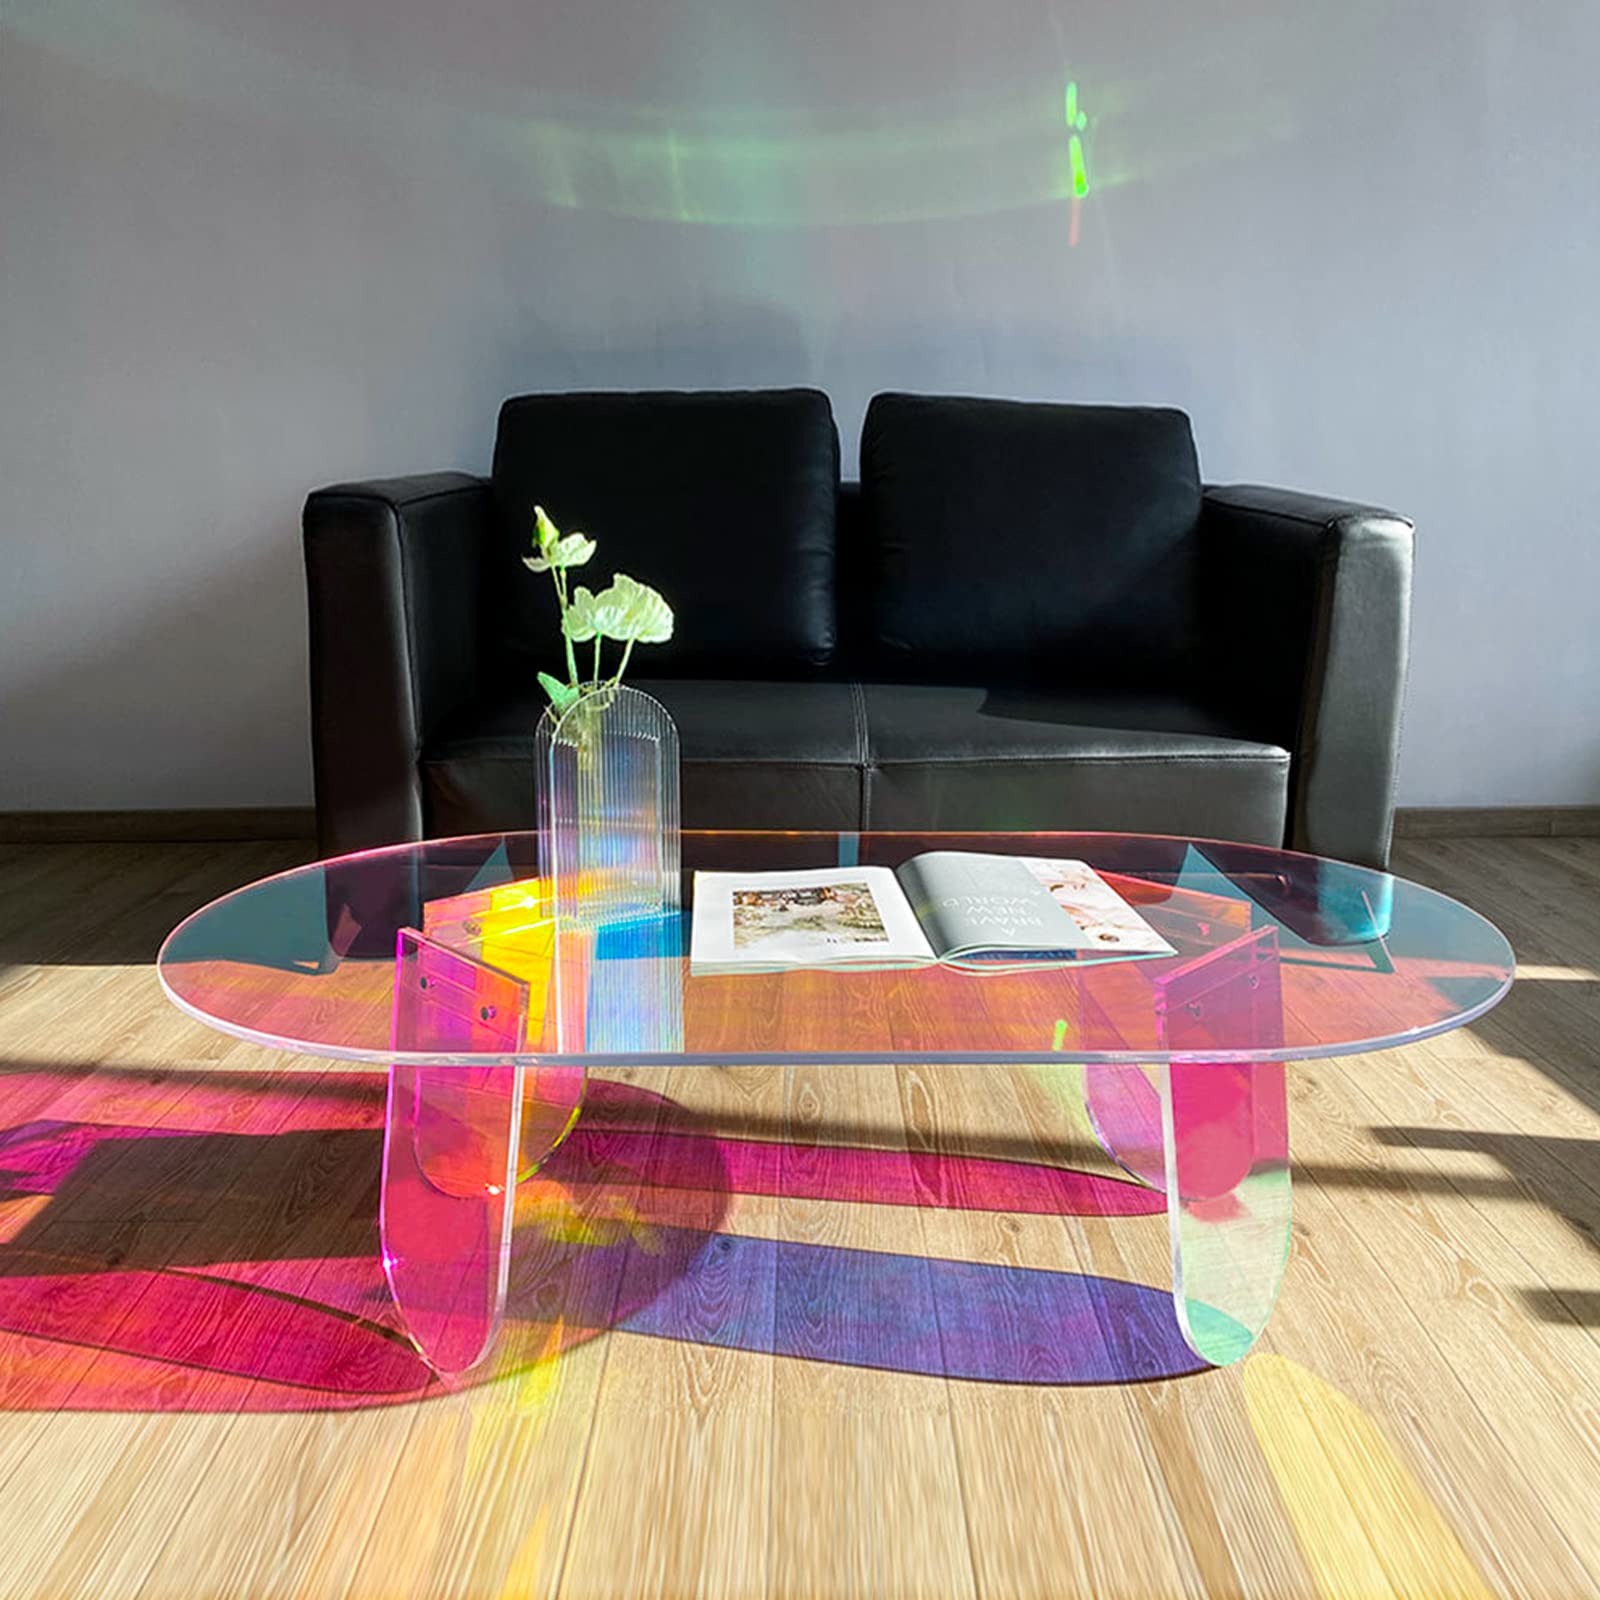 Botabay Acrylic Coffee Tables For Living Room Clear Coffee Table Iridescent Side Table Colorful Table Decor Table Round Side Tab